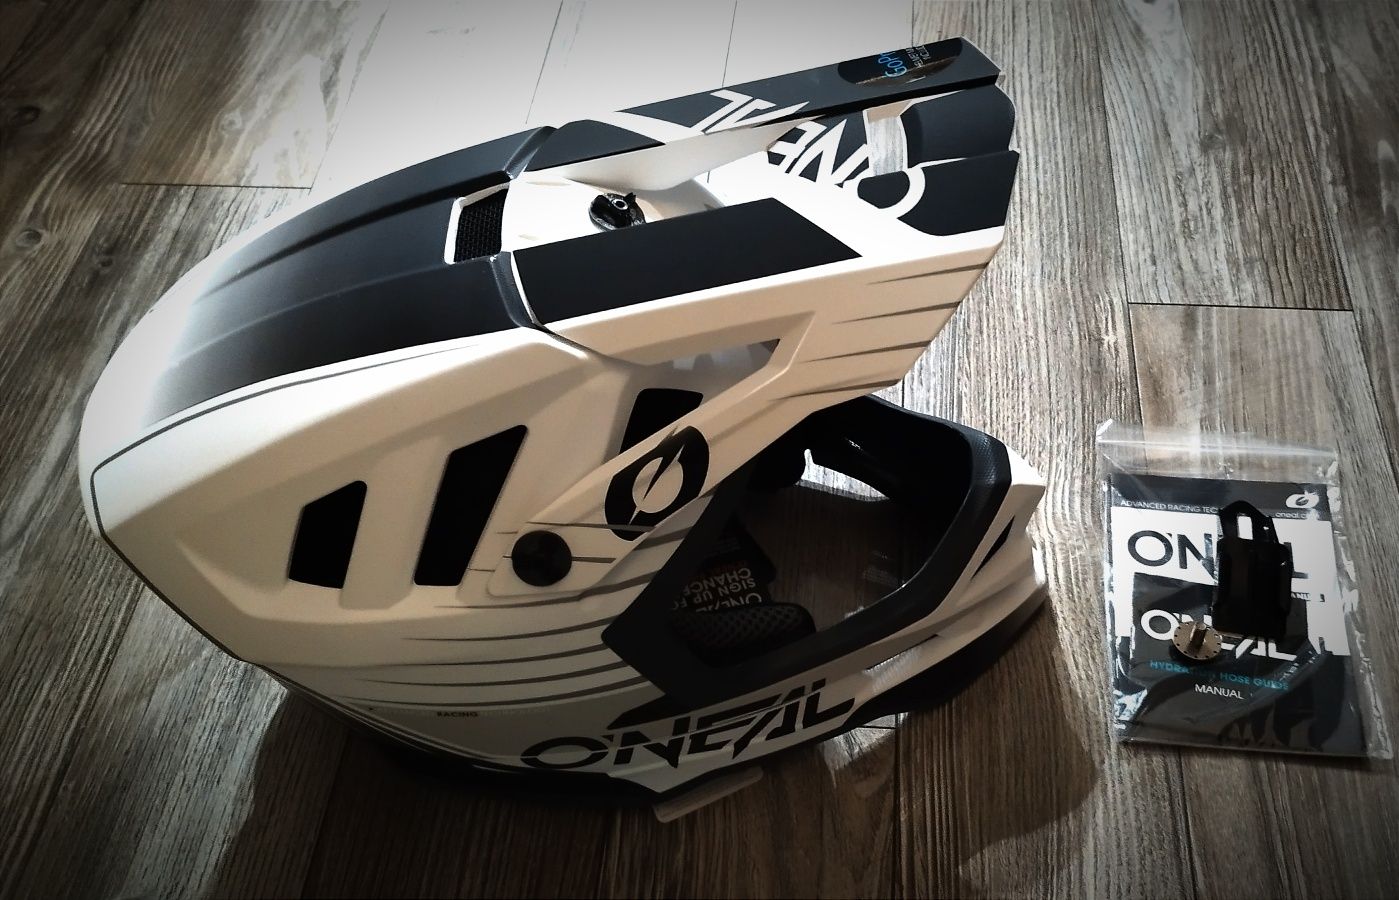 Kask Dh Oneal L 58-59